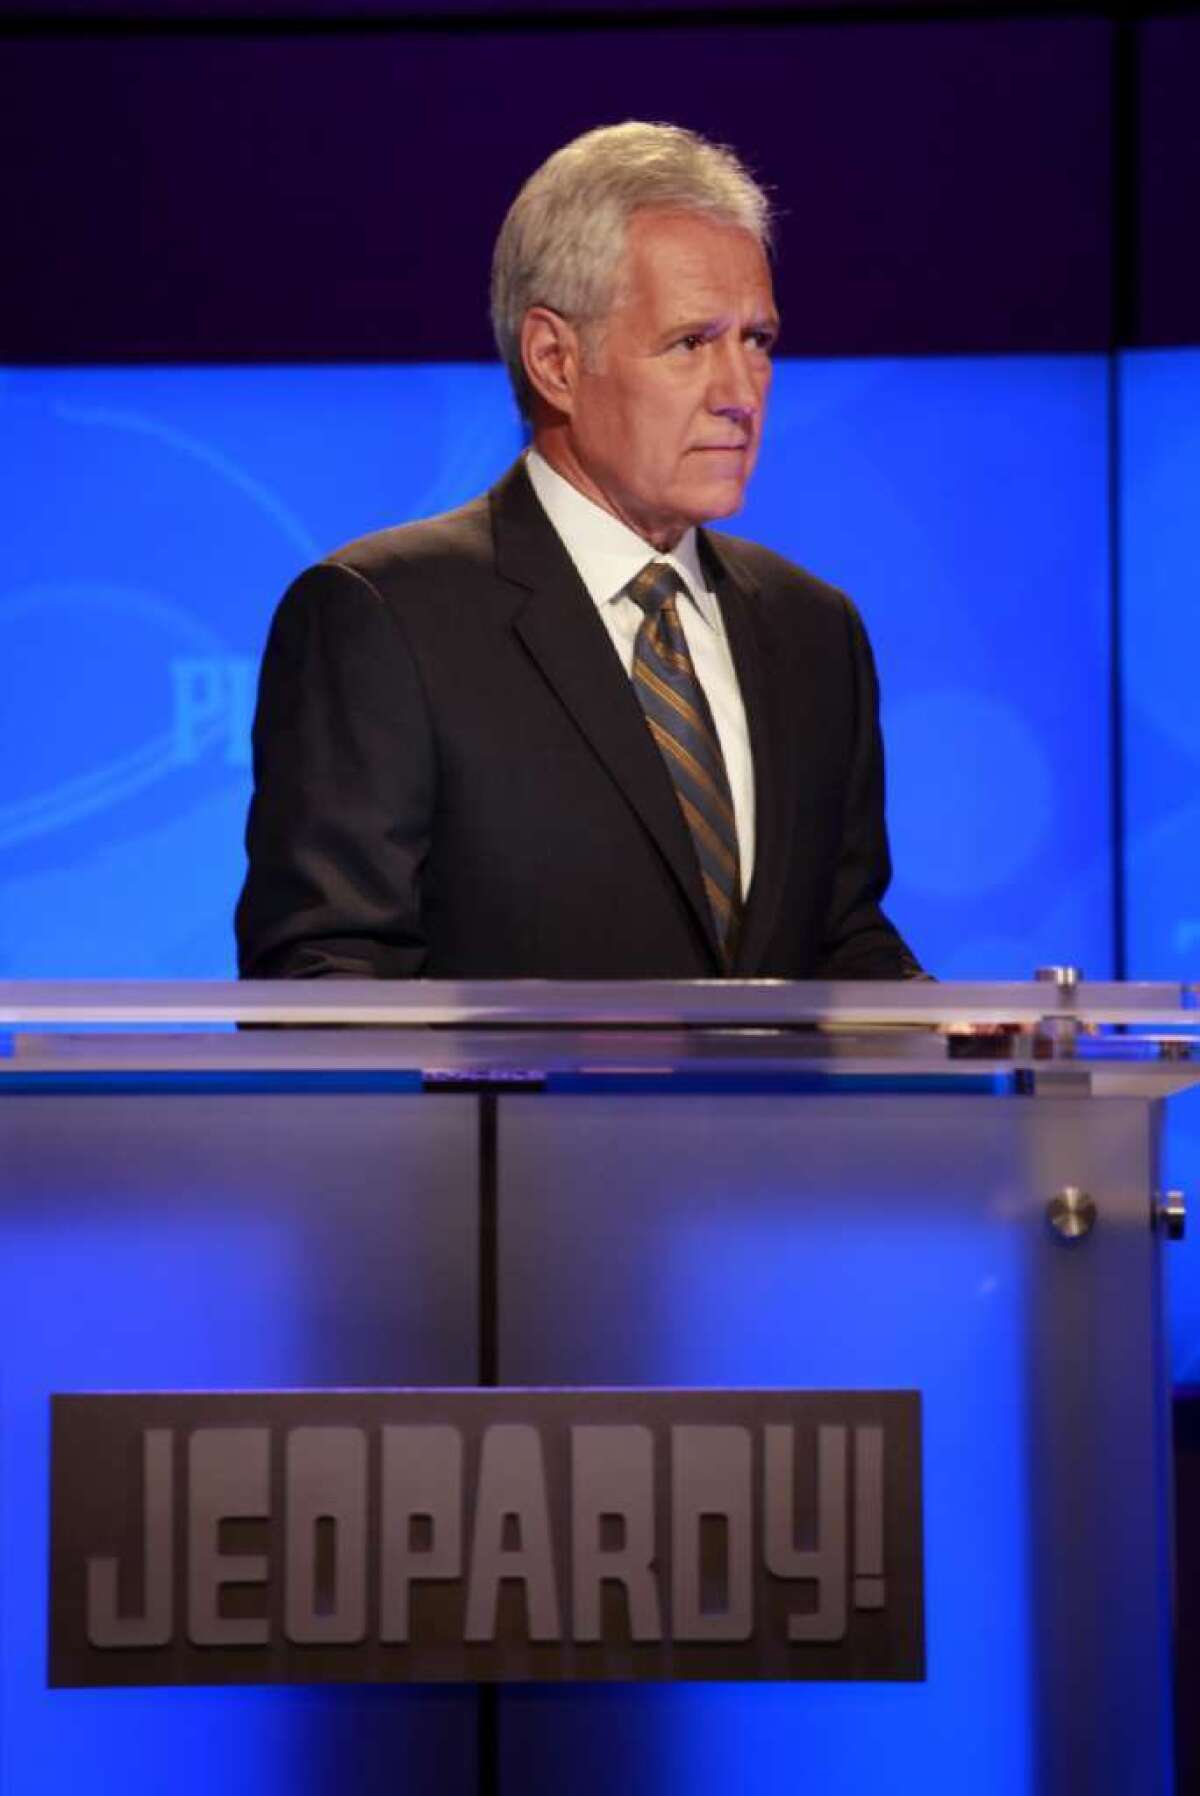 Alex Trebek is the longtime host of the TV game show "Jeopardy!"